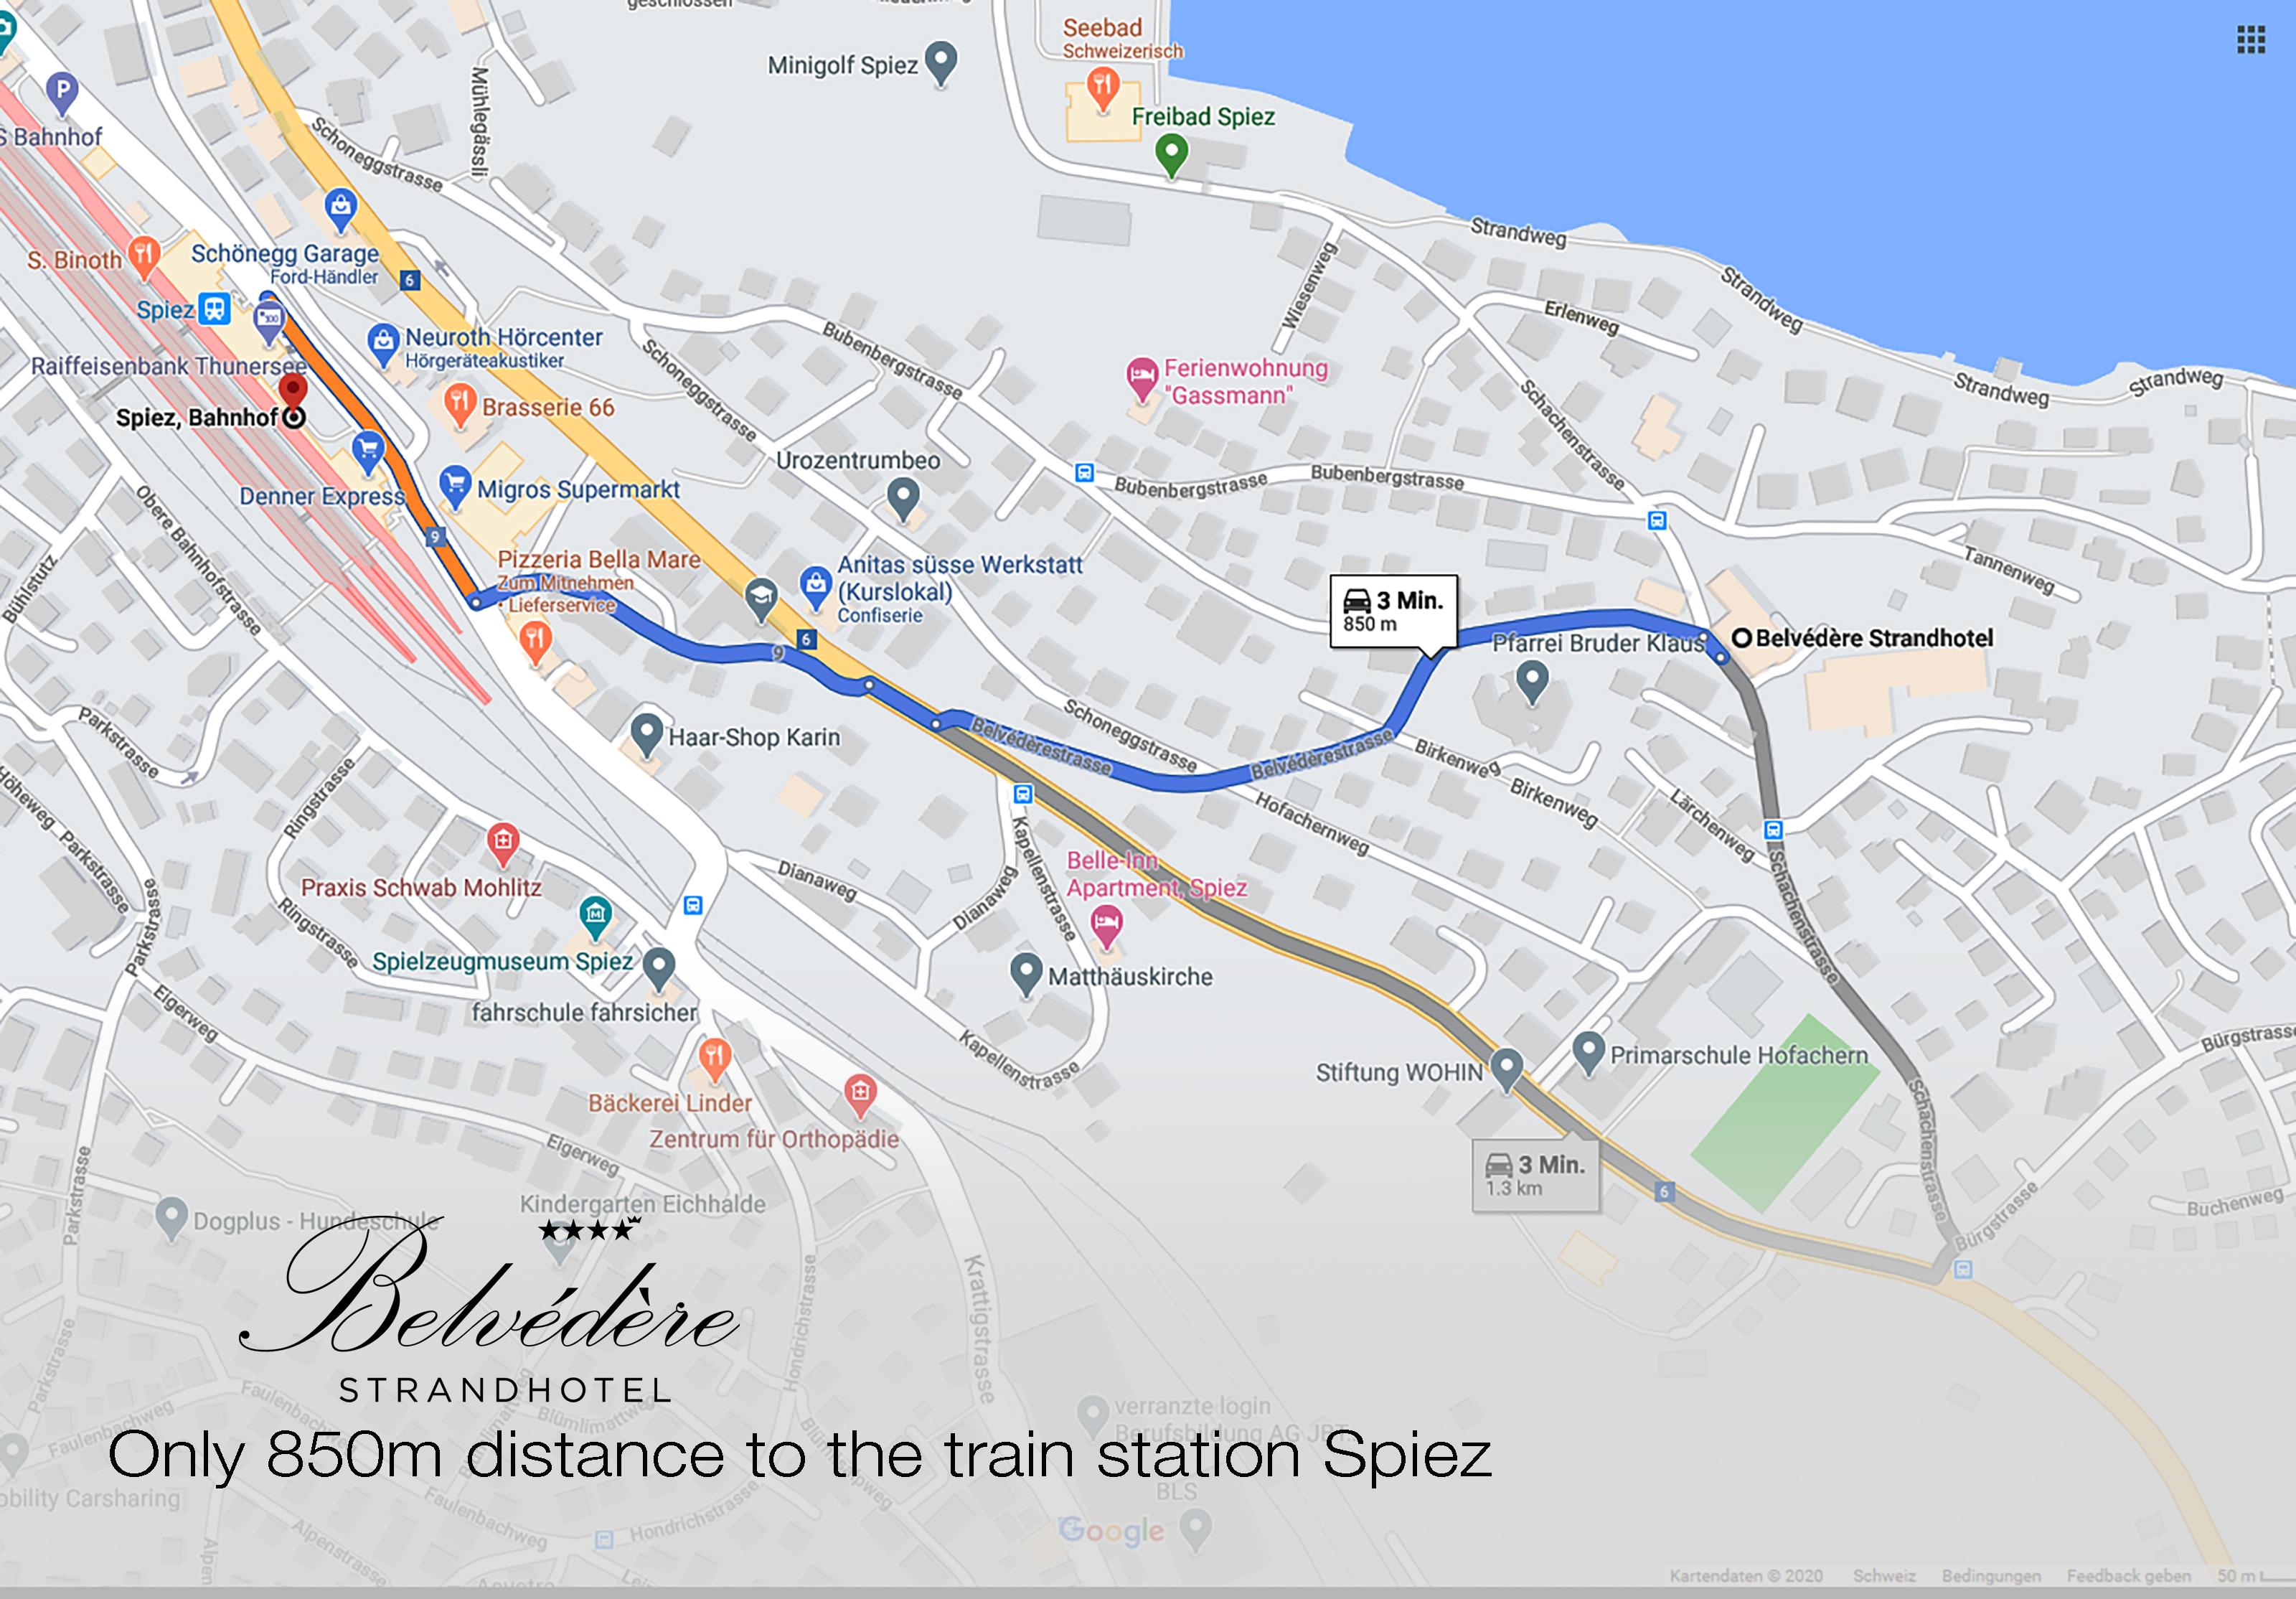 Only 850m distance to the train station Spiez